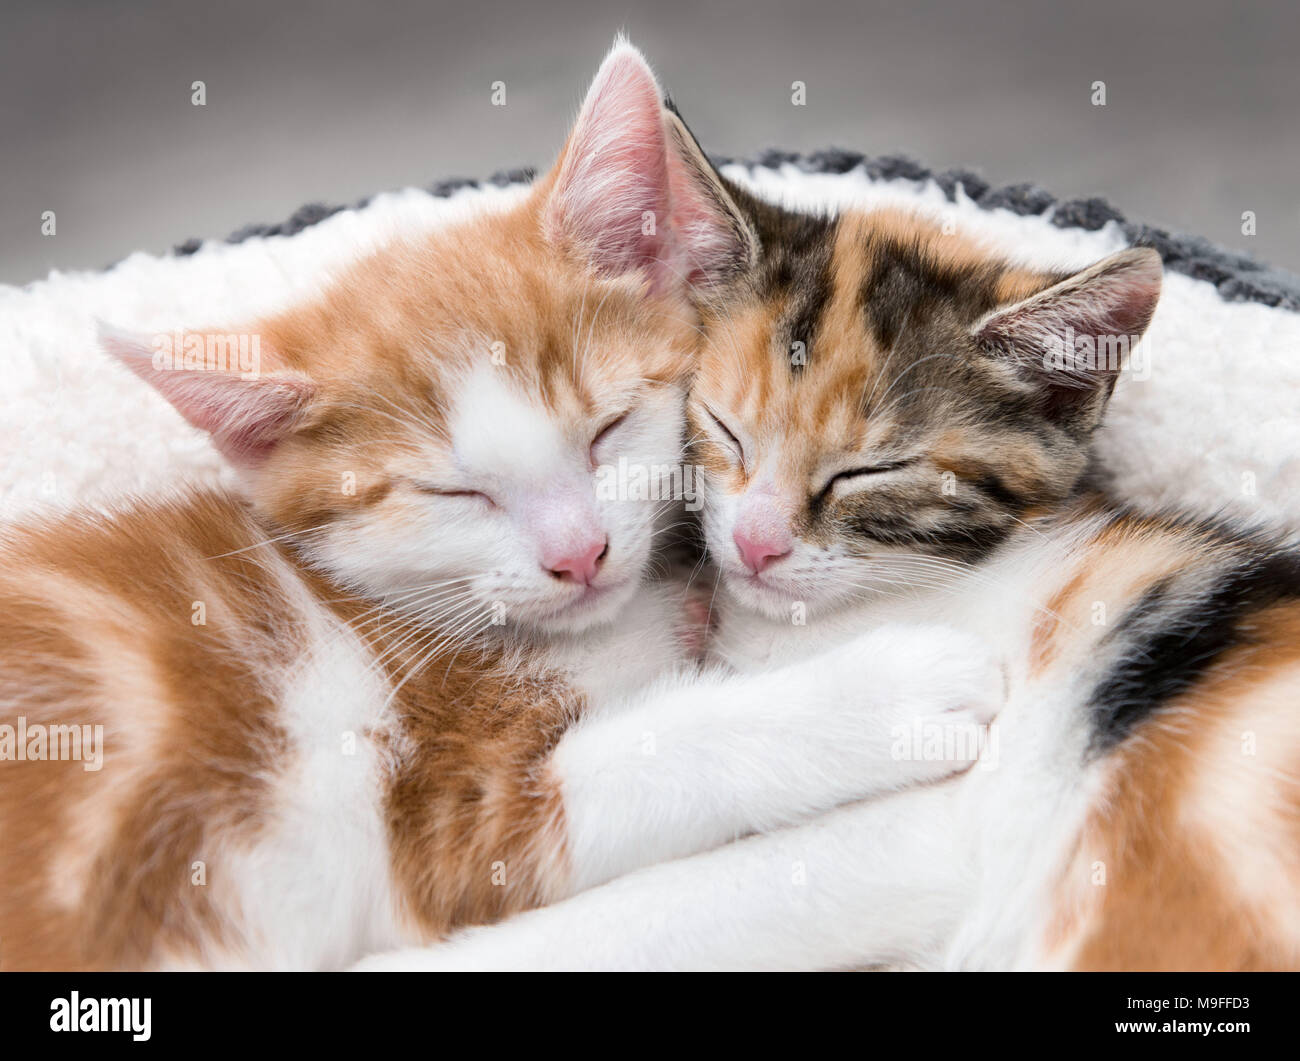 Looking down at two cute kittens sleeping in a white bed Stock Photo